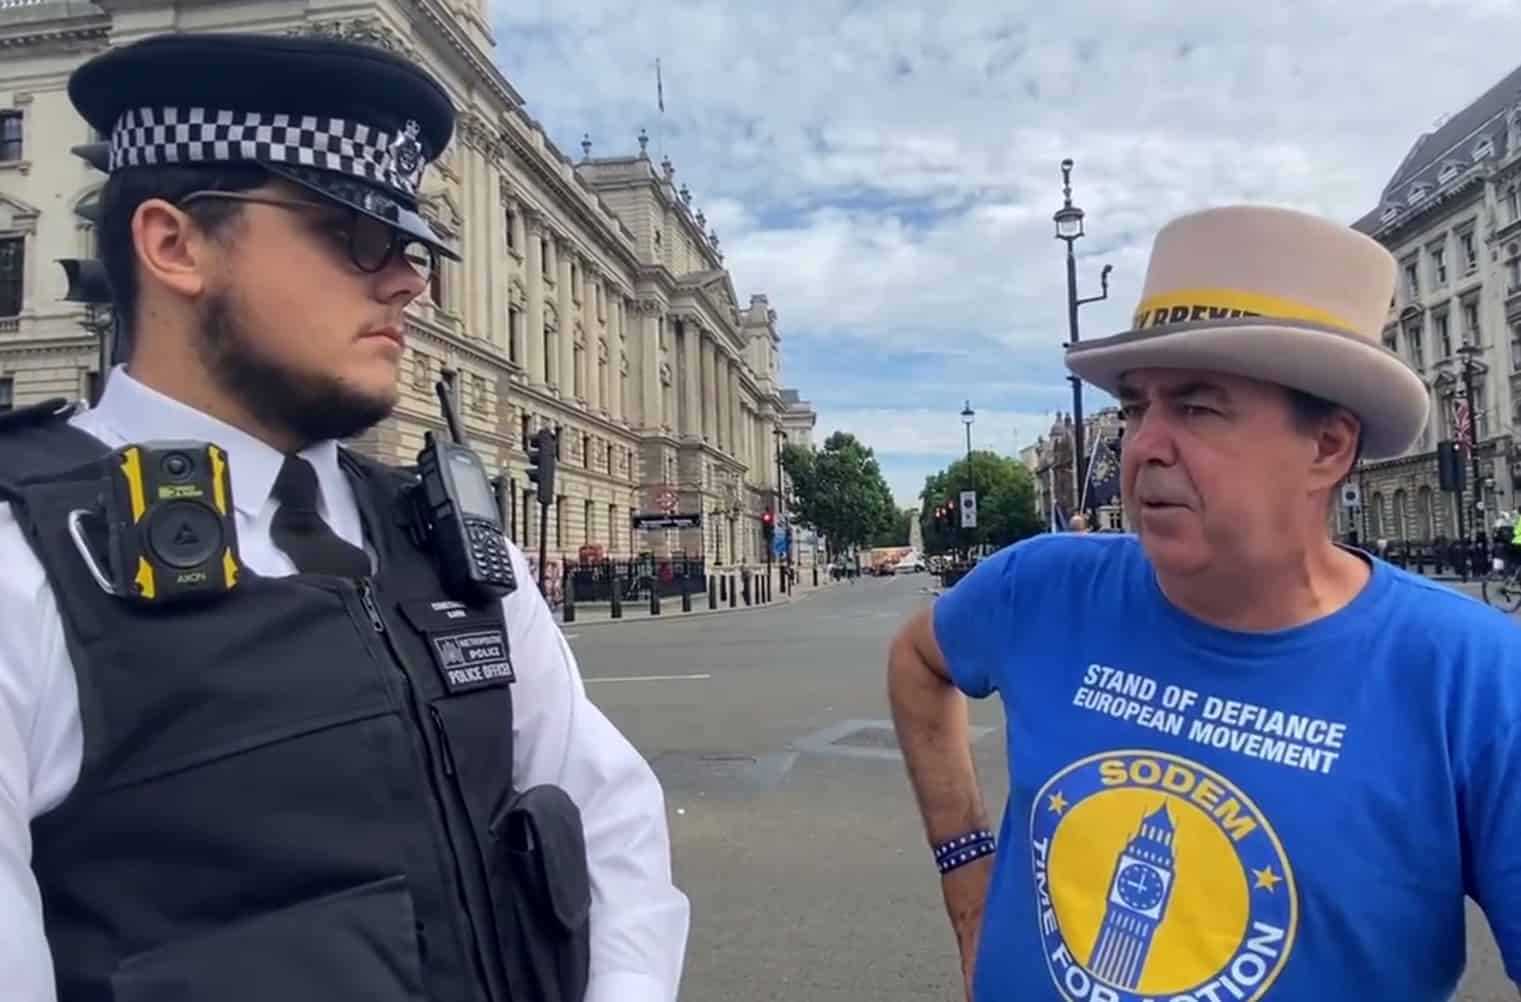 Steve Bray given police minders outside parliament